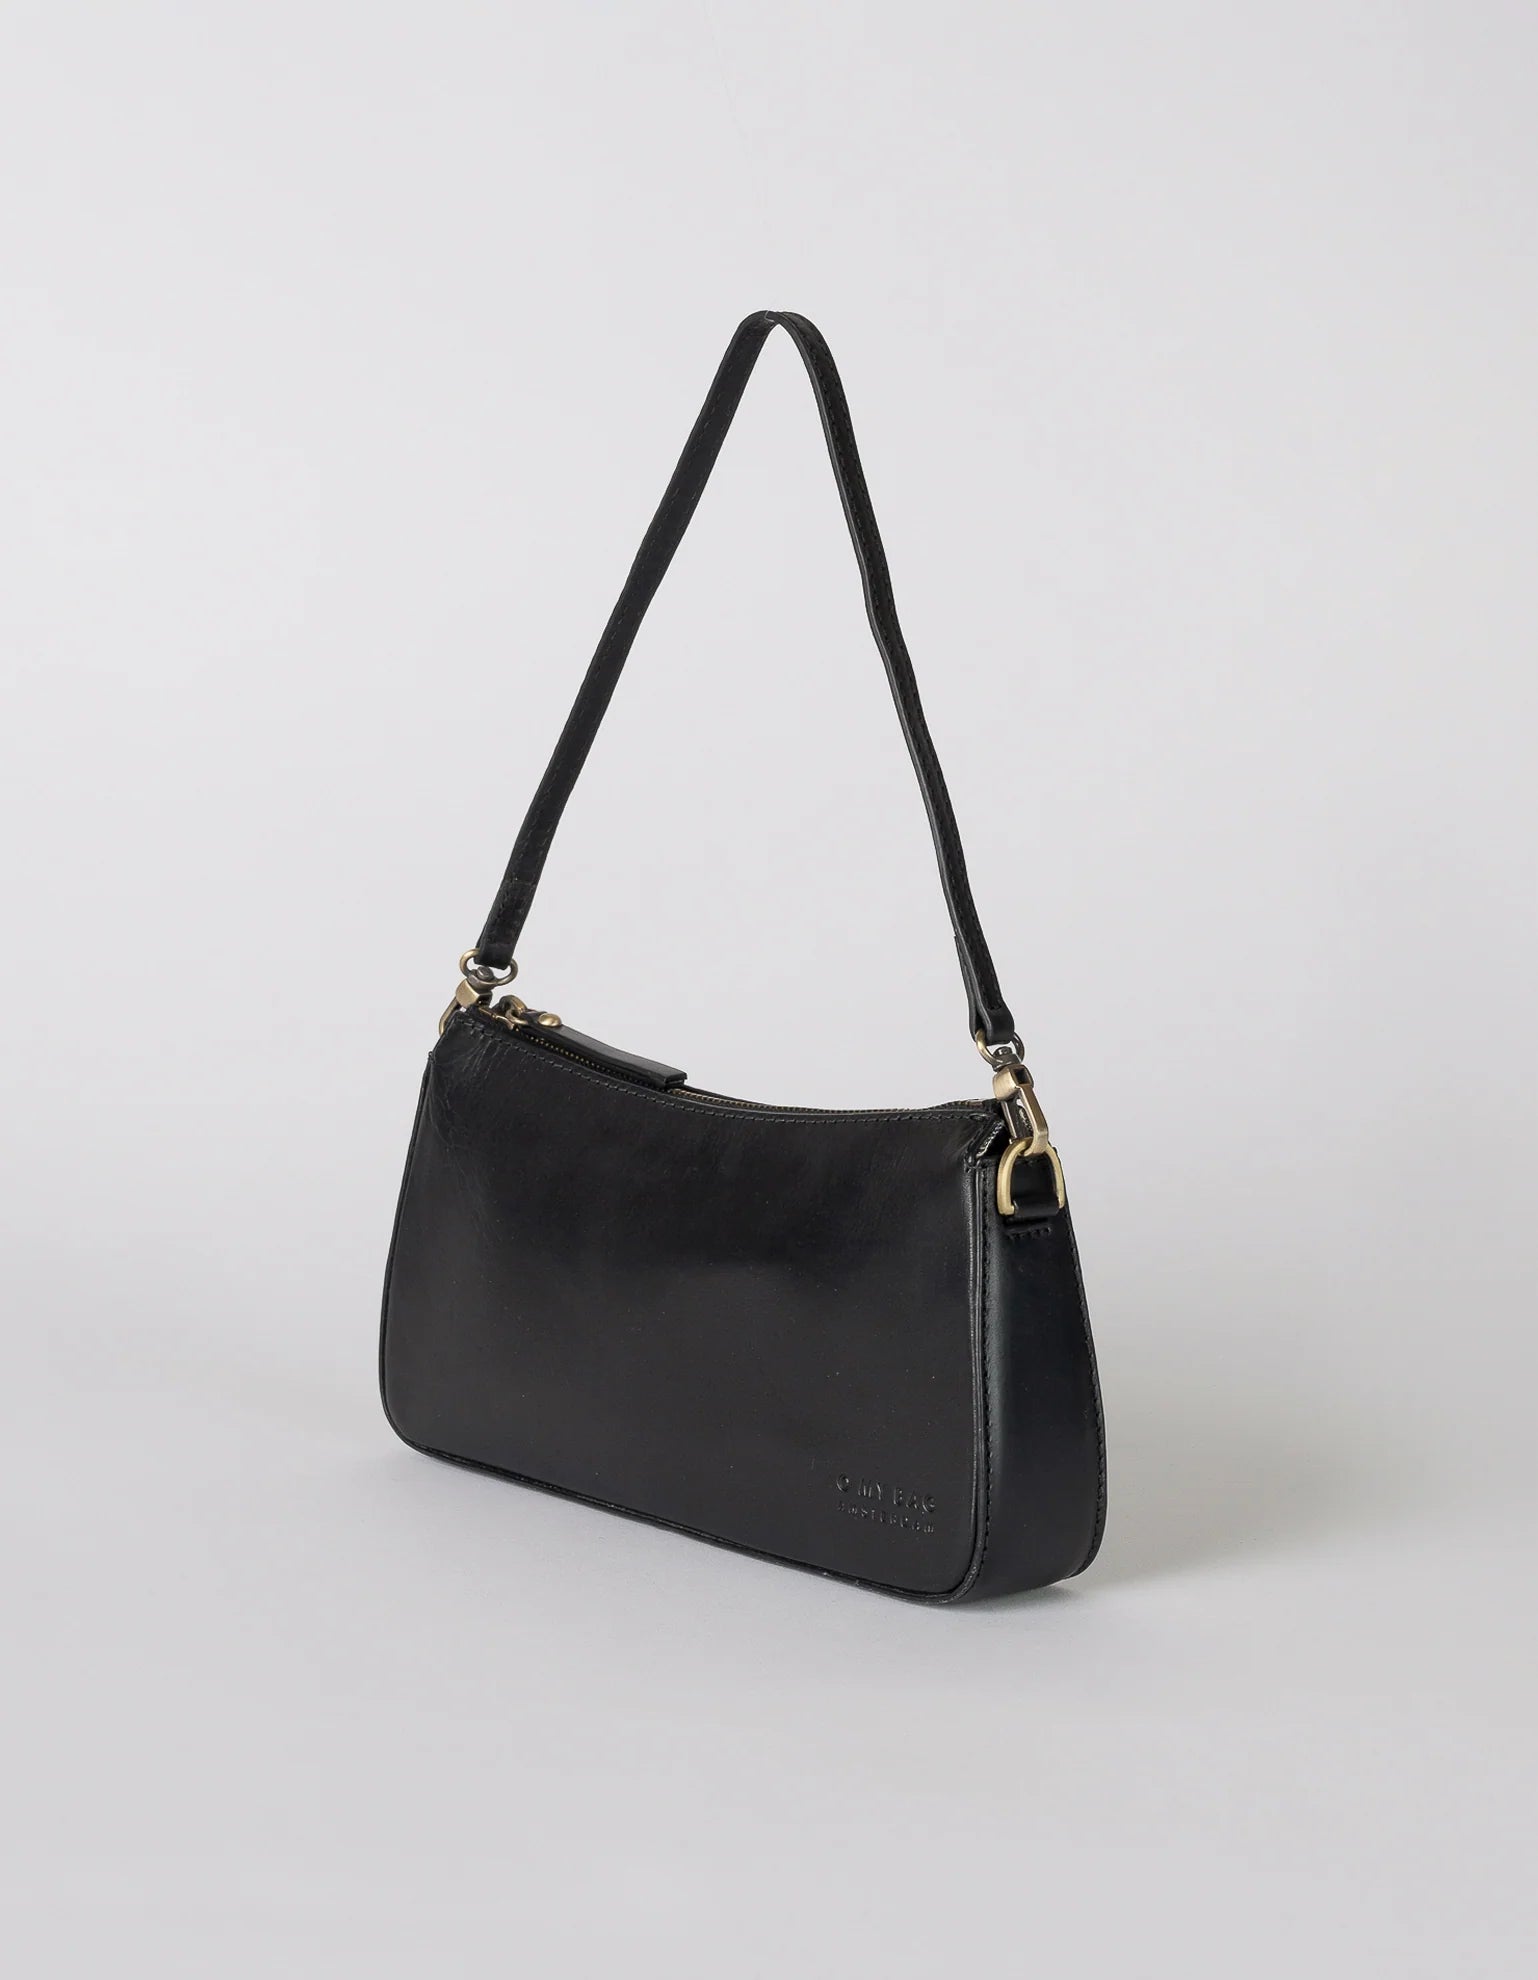 TAYLOR BAG - BLACK CLASSIC LEATHER